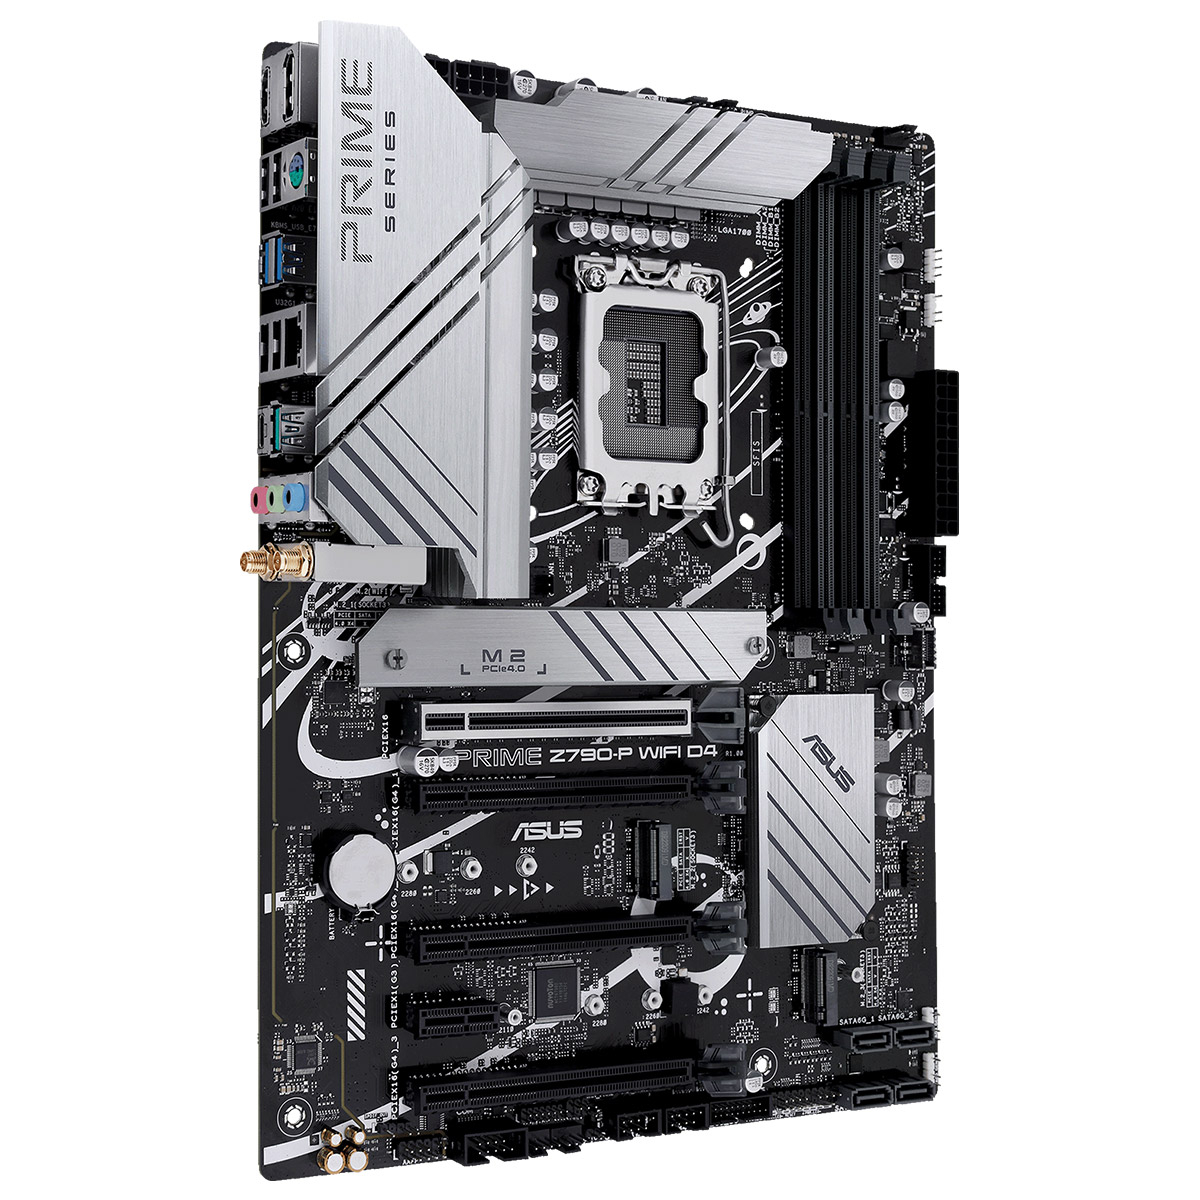 Motherboard ATX Asus Prime Z790-P WiFi D4 DDR4 3